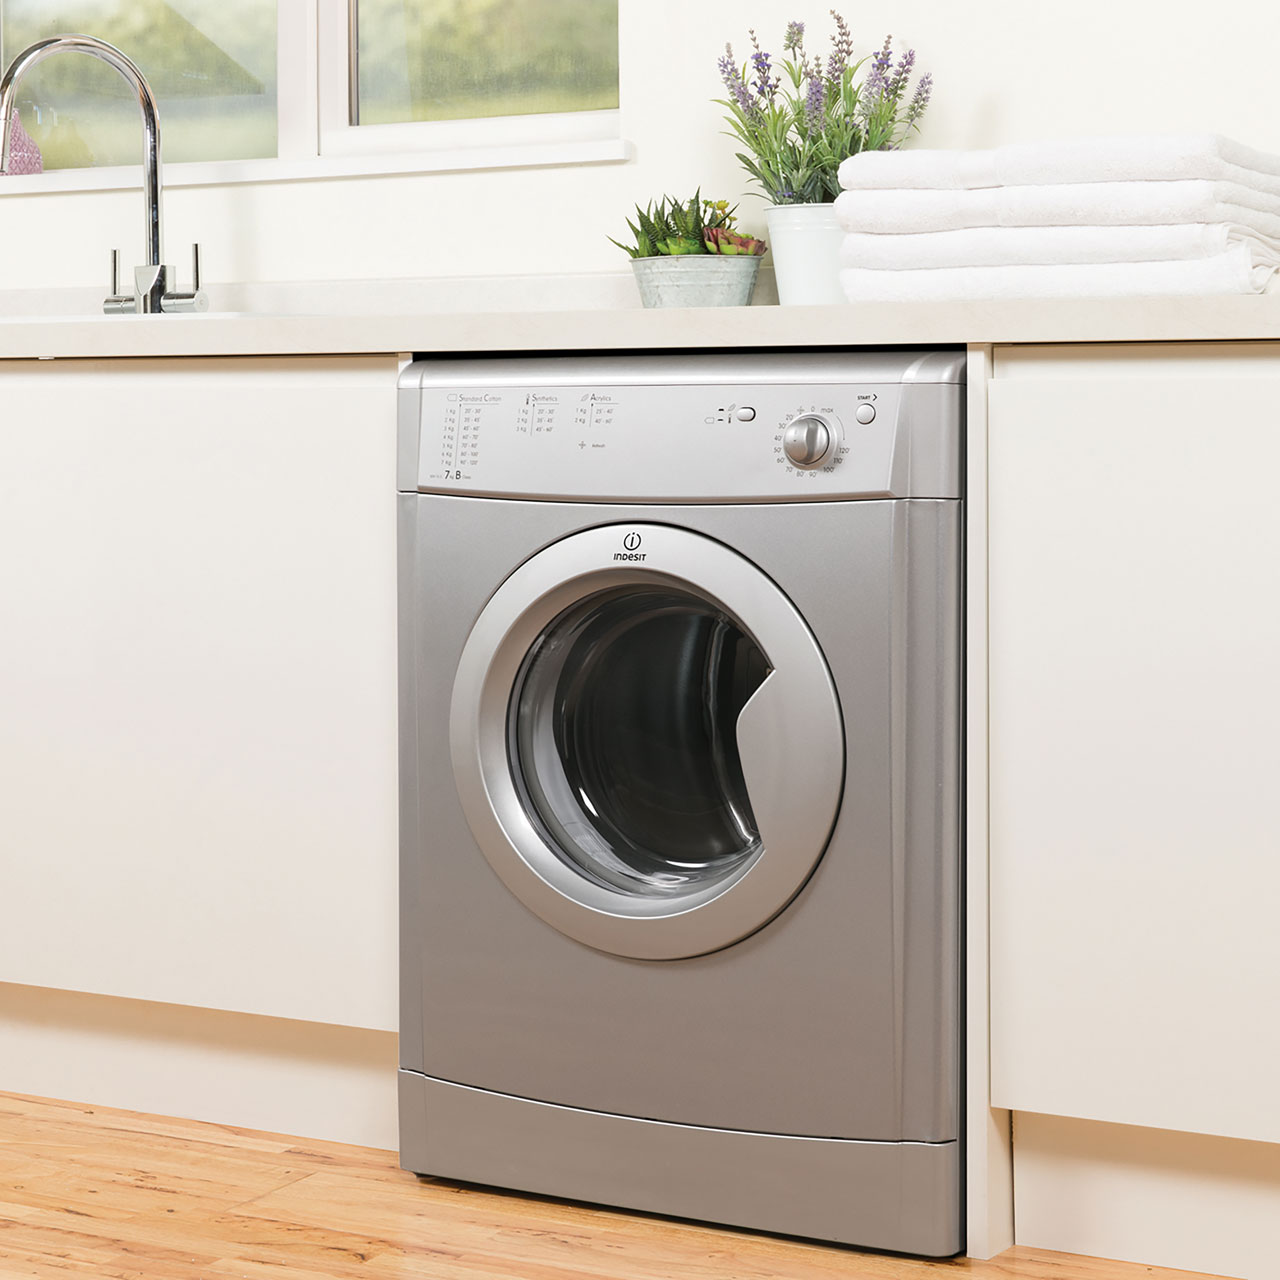 Indesit IDV75S Eco Time B Rated 7Kg Vented Tumble Dryer Silver